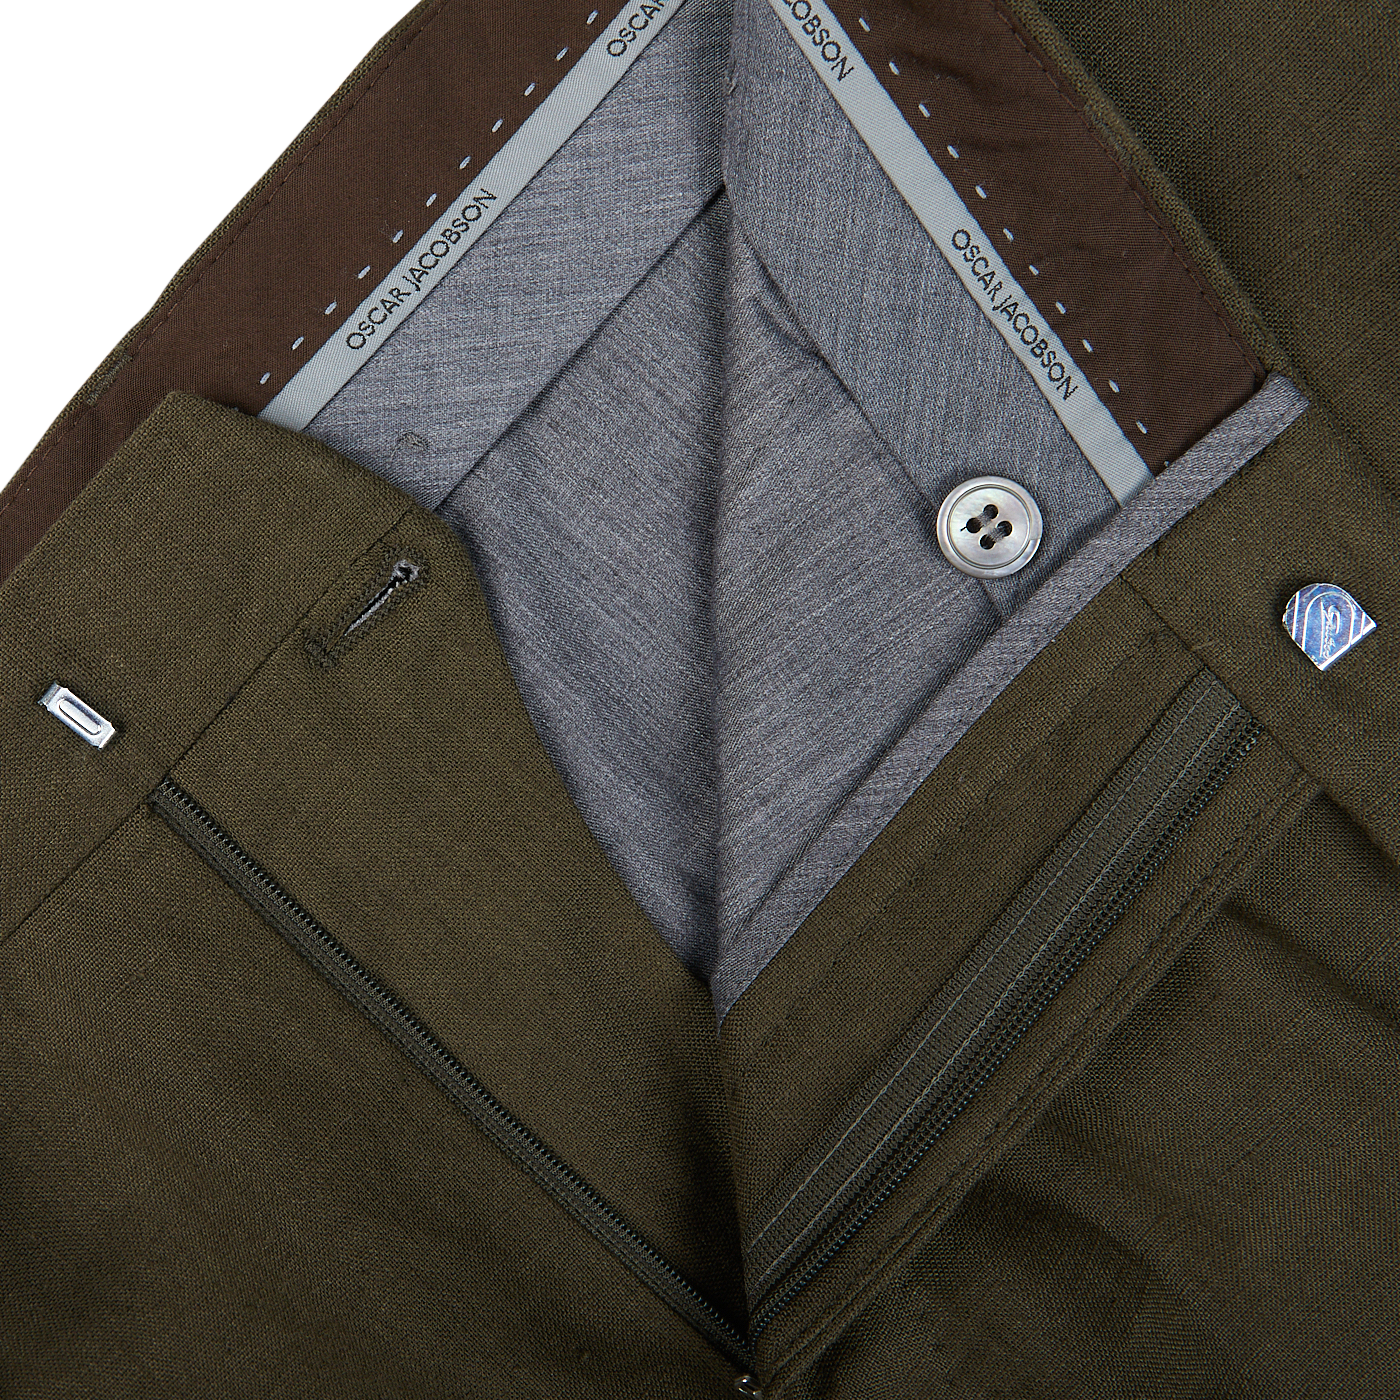 Close-up of a layered men's outfit with an Oscar Jacobson Green Leaf Pure Linen Suit jacket, grey vest, and white shirt.